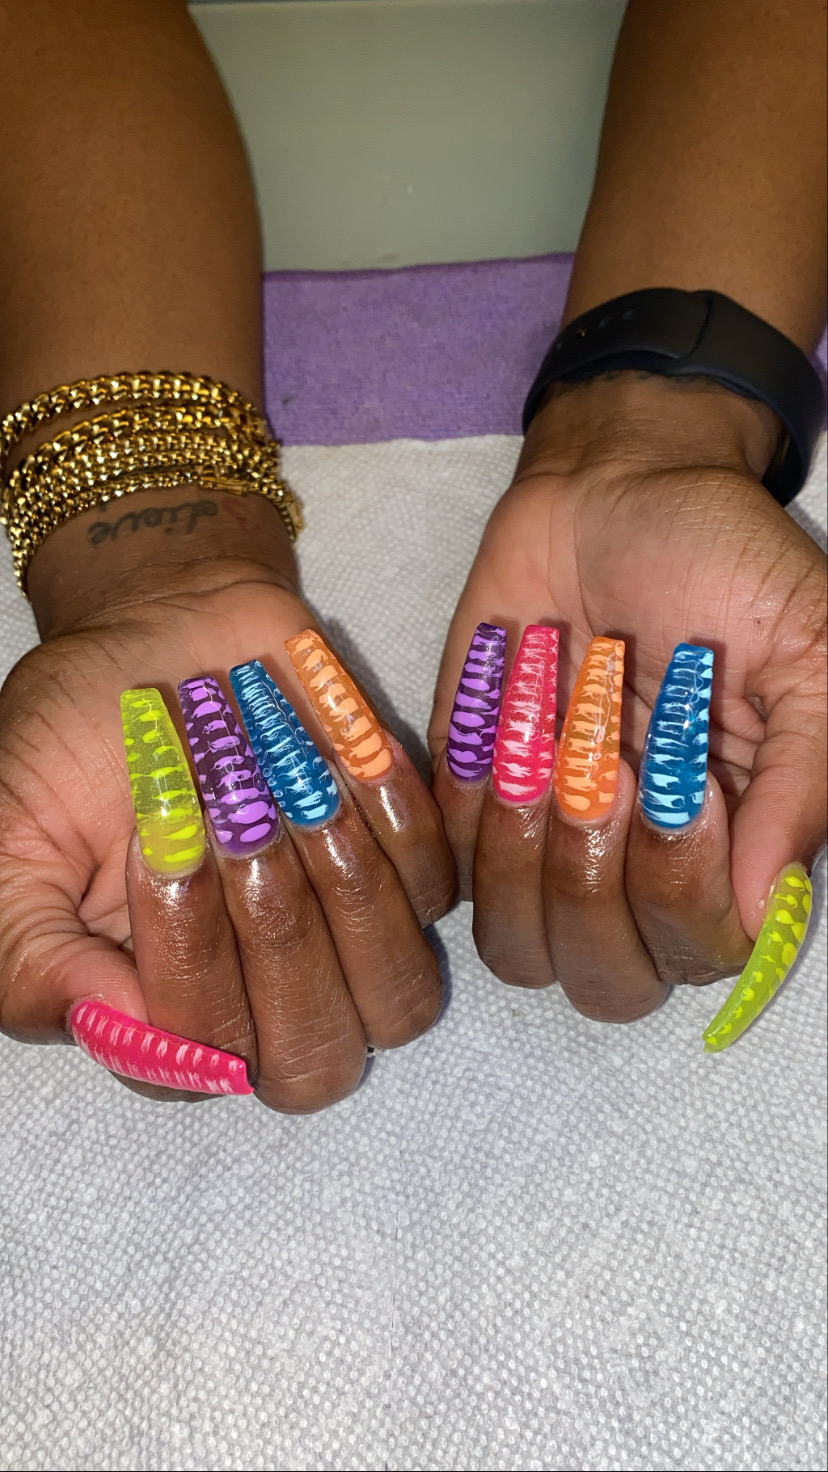 Nail Journey | 21215 NW 37th Ave, Miami Gardens, FL 33056 | Phone: (954) 380-0841